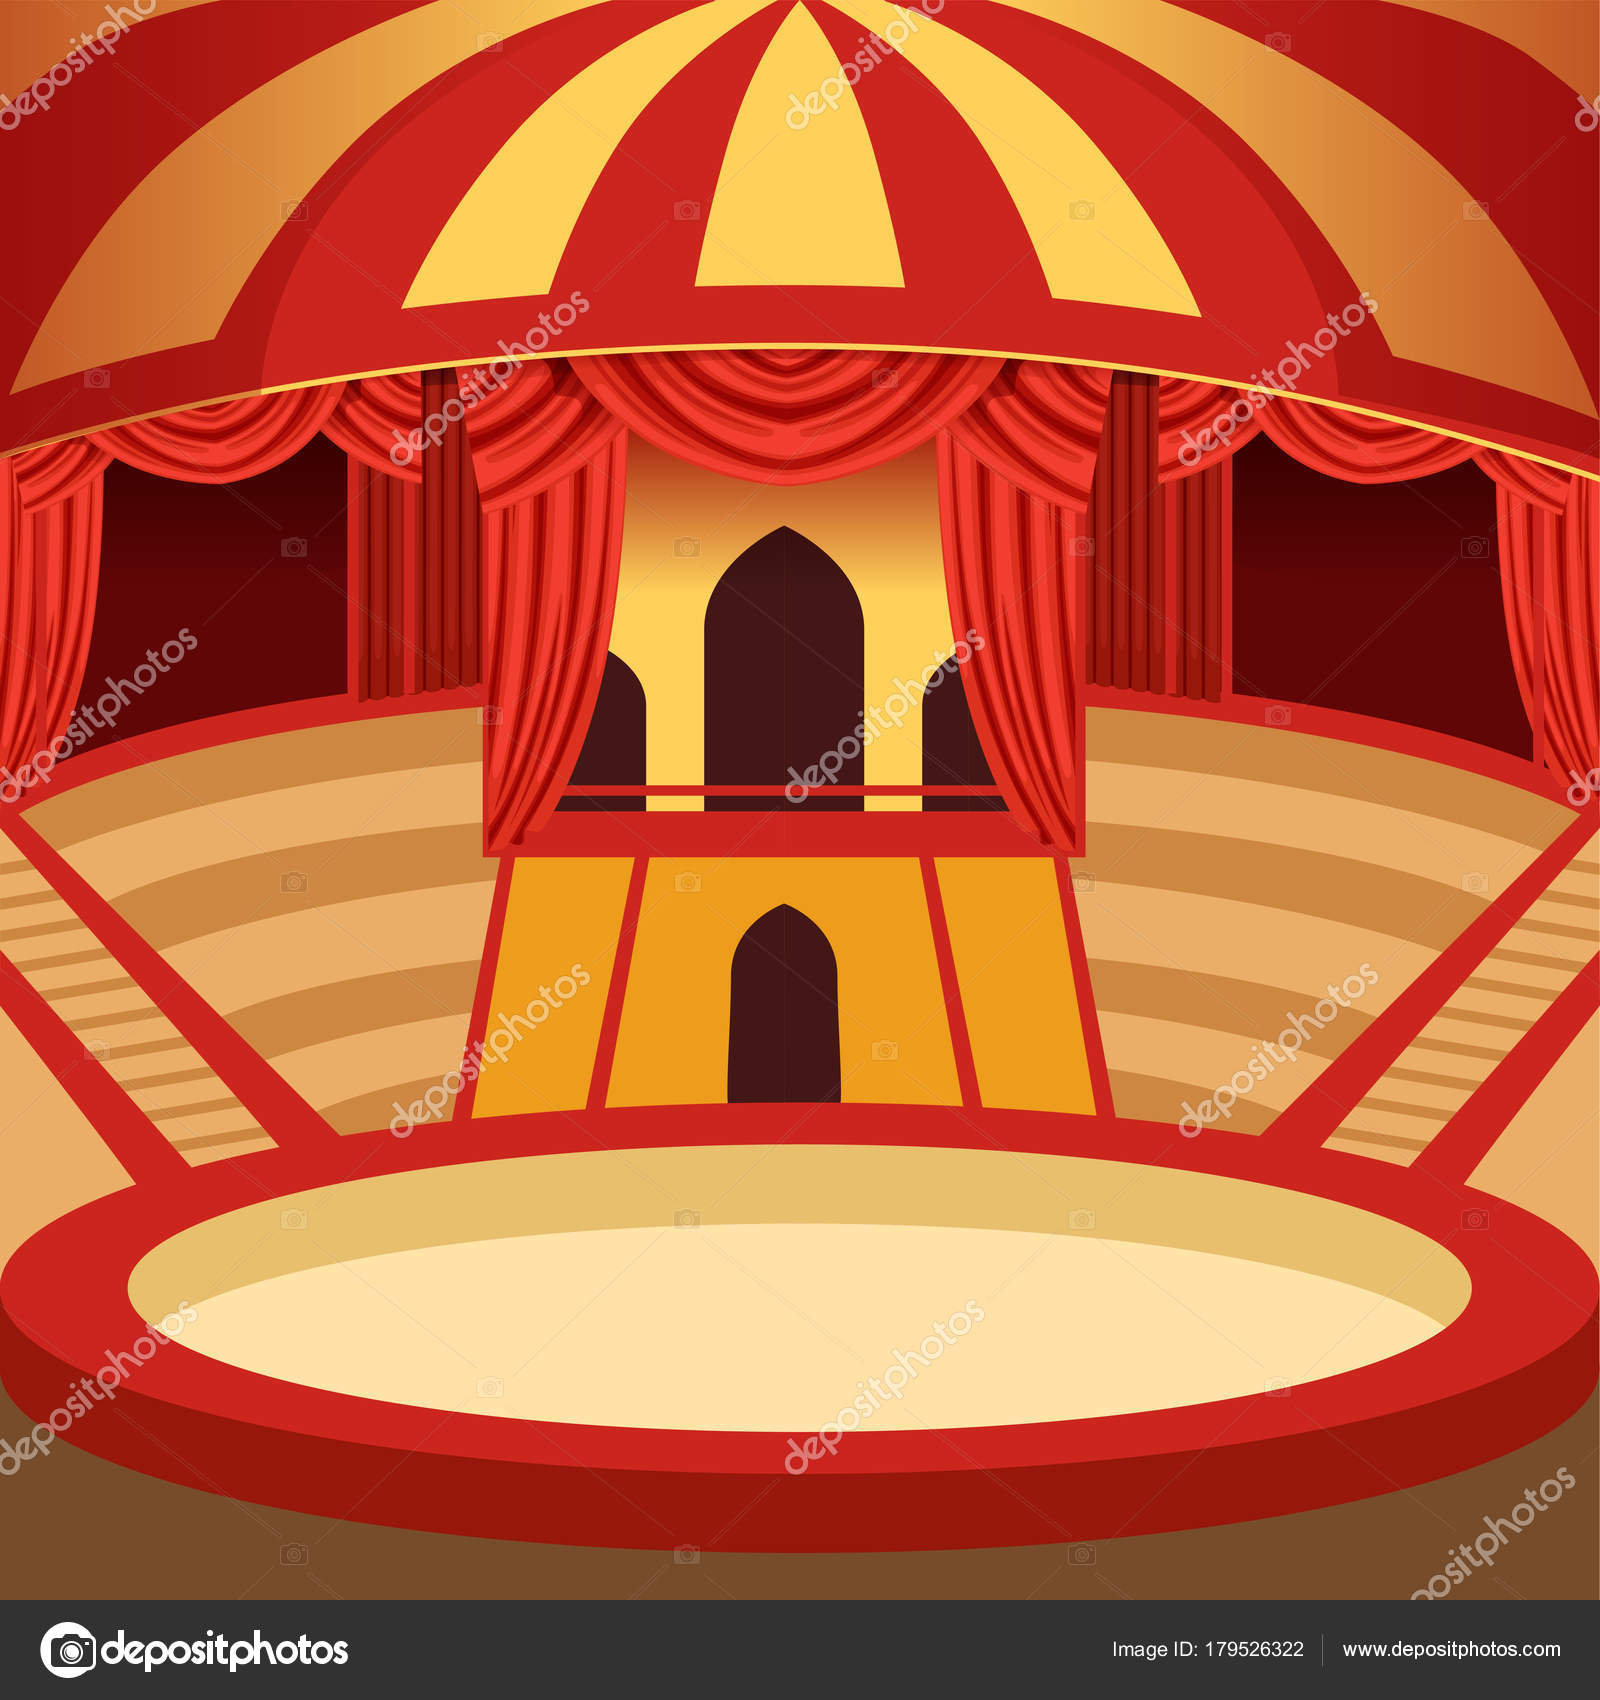 Circus Arena Cartoon Design Classic Stage With Yellow And